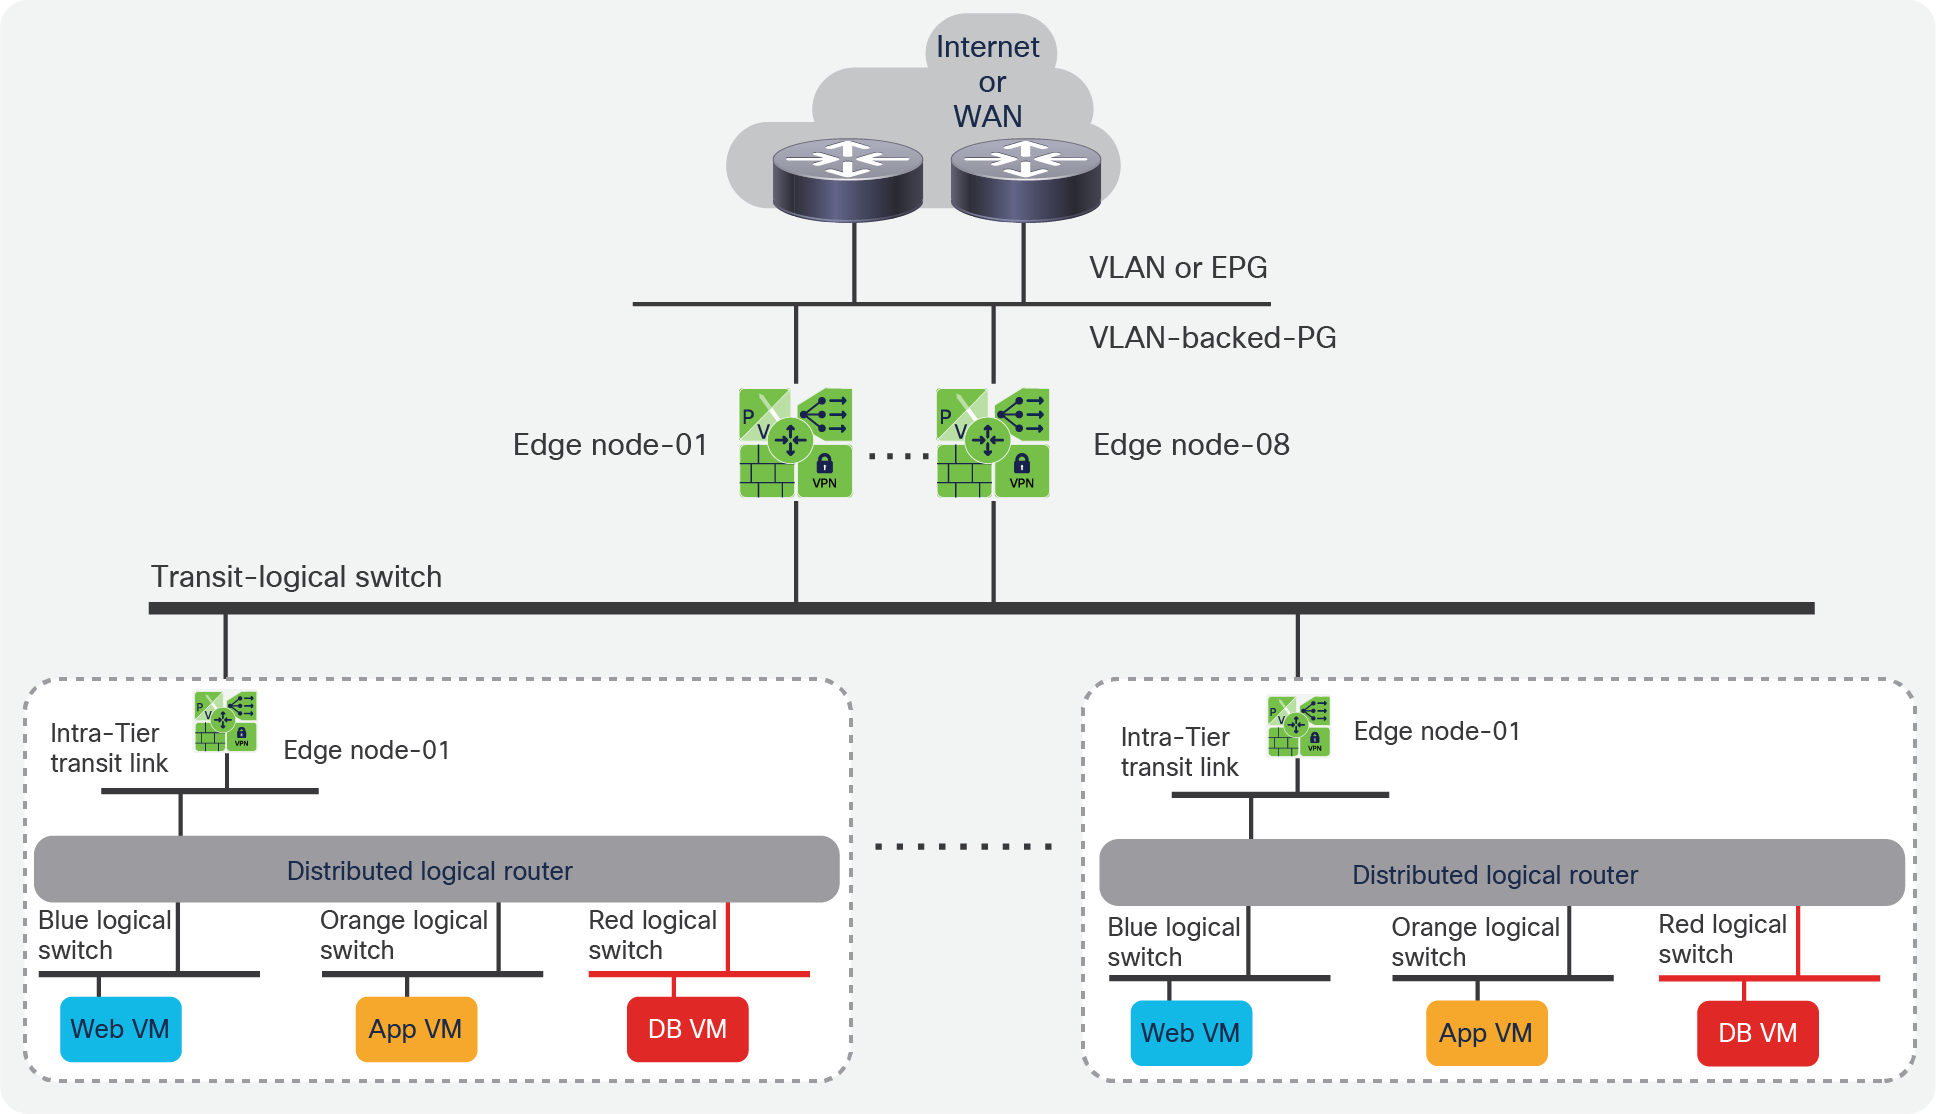 Typical scalable three-tier overlay routing design with NSX-T